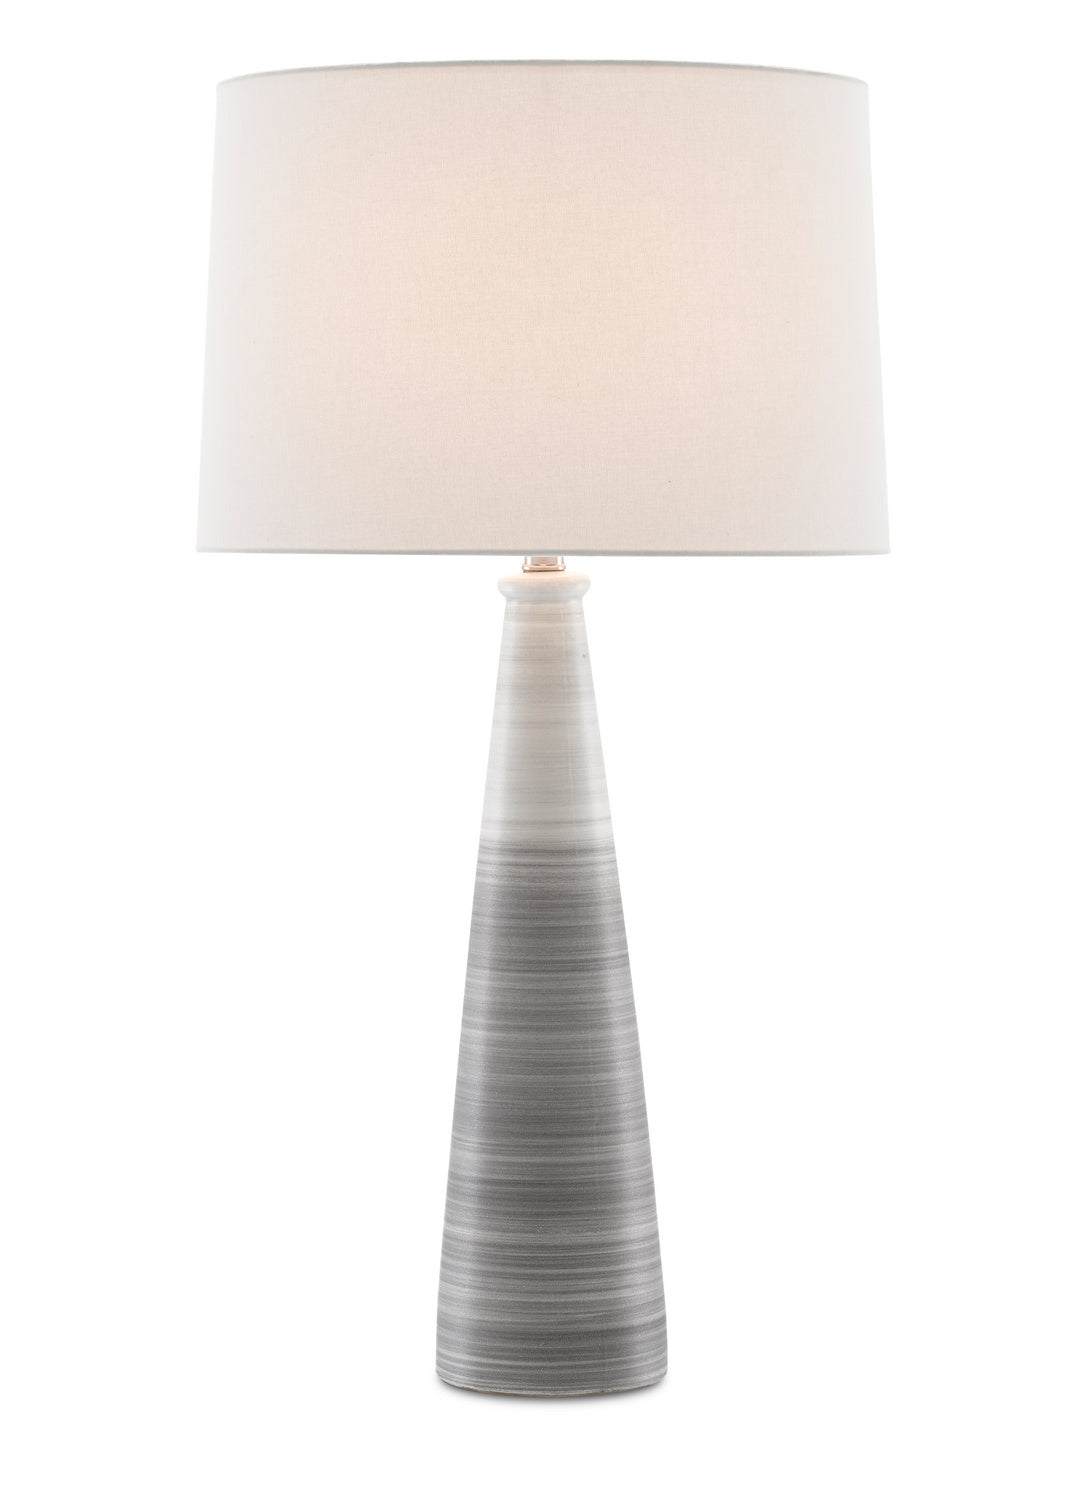 One Light Table Lamp from the Forefront collection in Gray/White finish